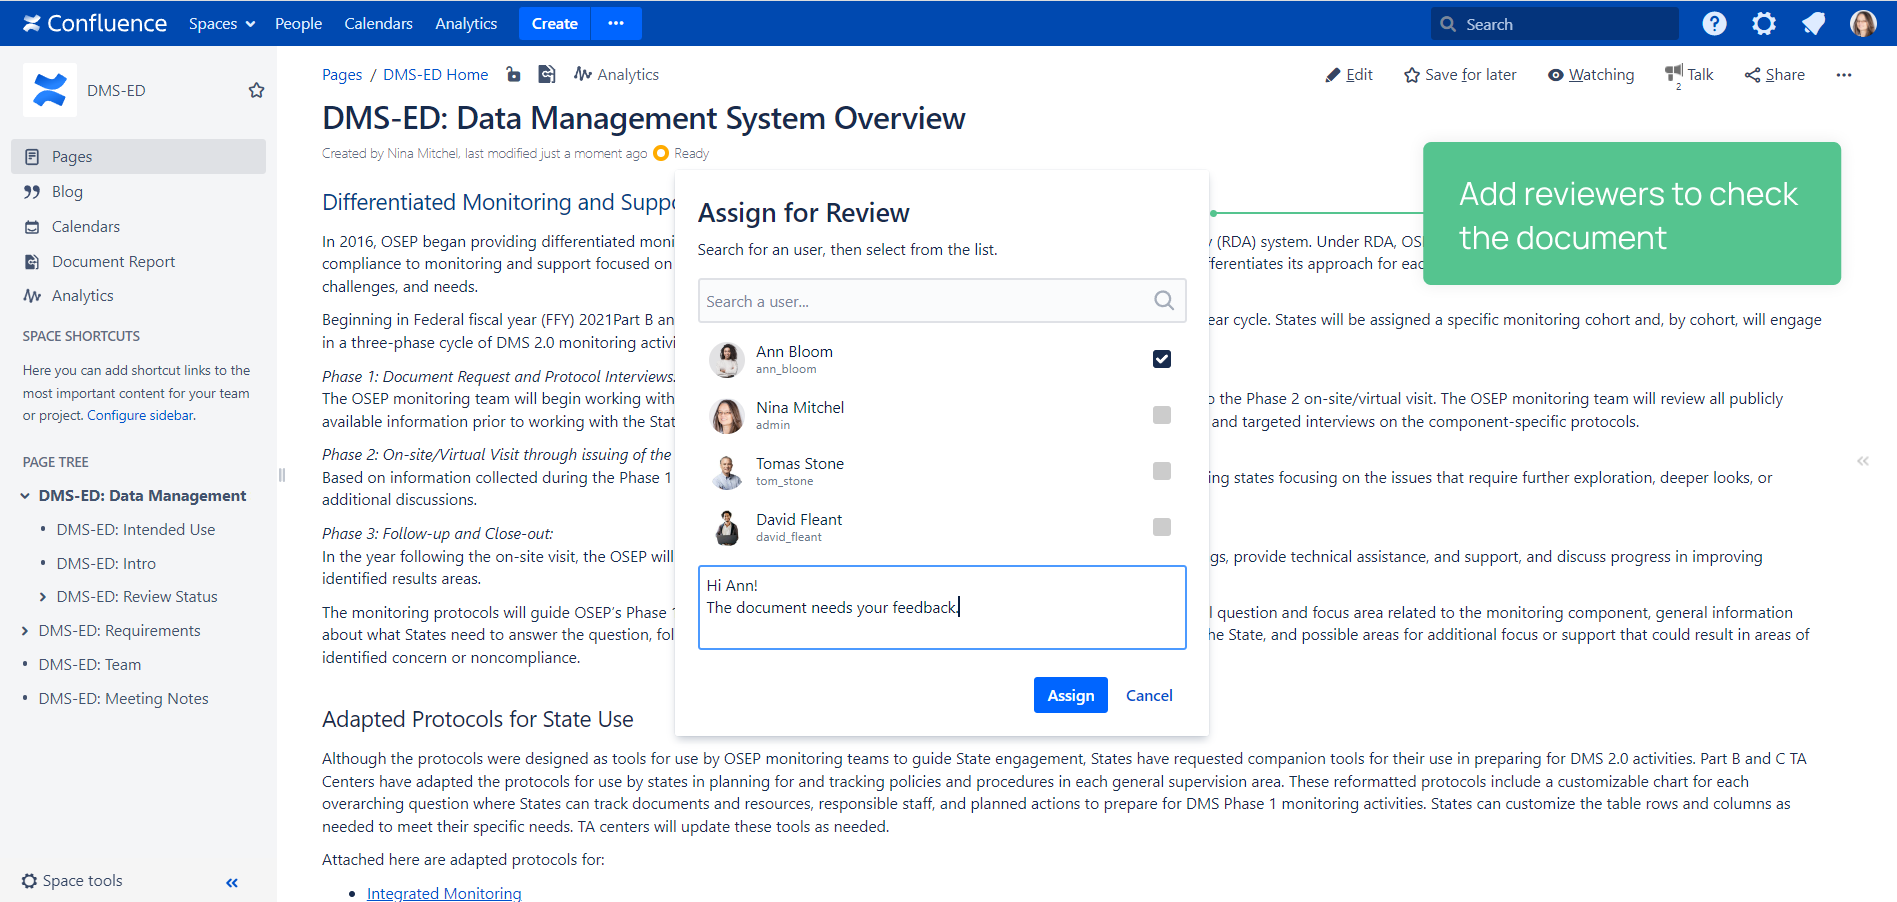 Document Review in Confluence